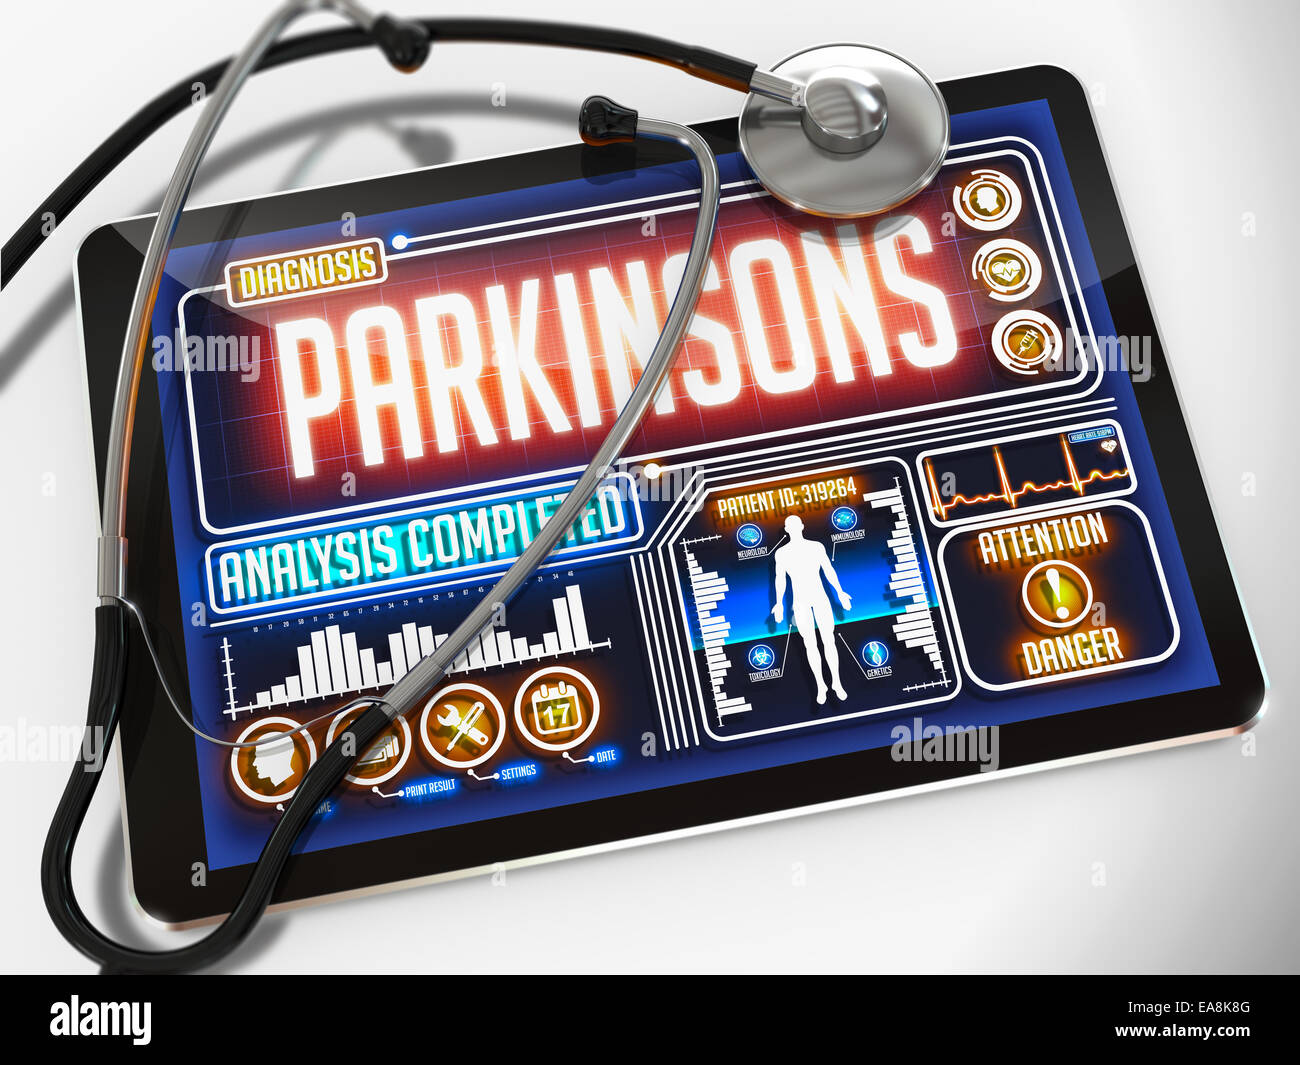 Medical Tablet with the Diagnosis of Parkinsons on the Display and a Black Stethoscope on White Background. Stock Photo